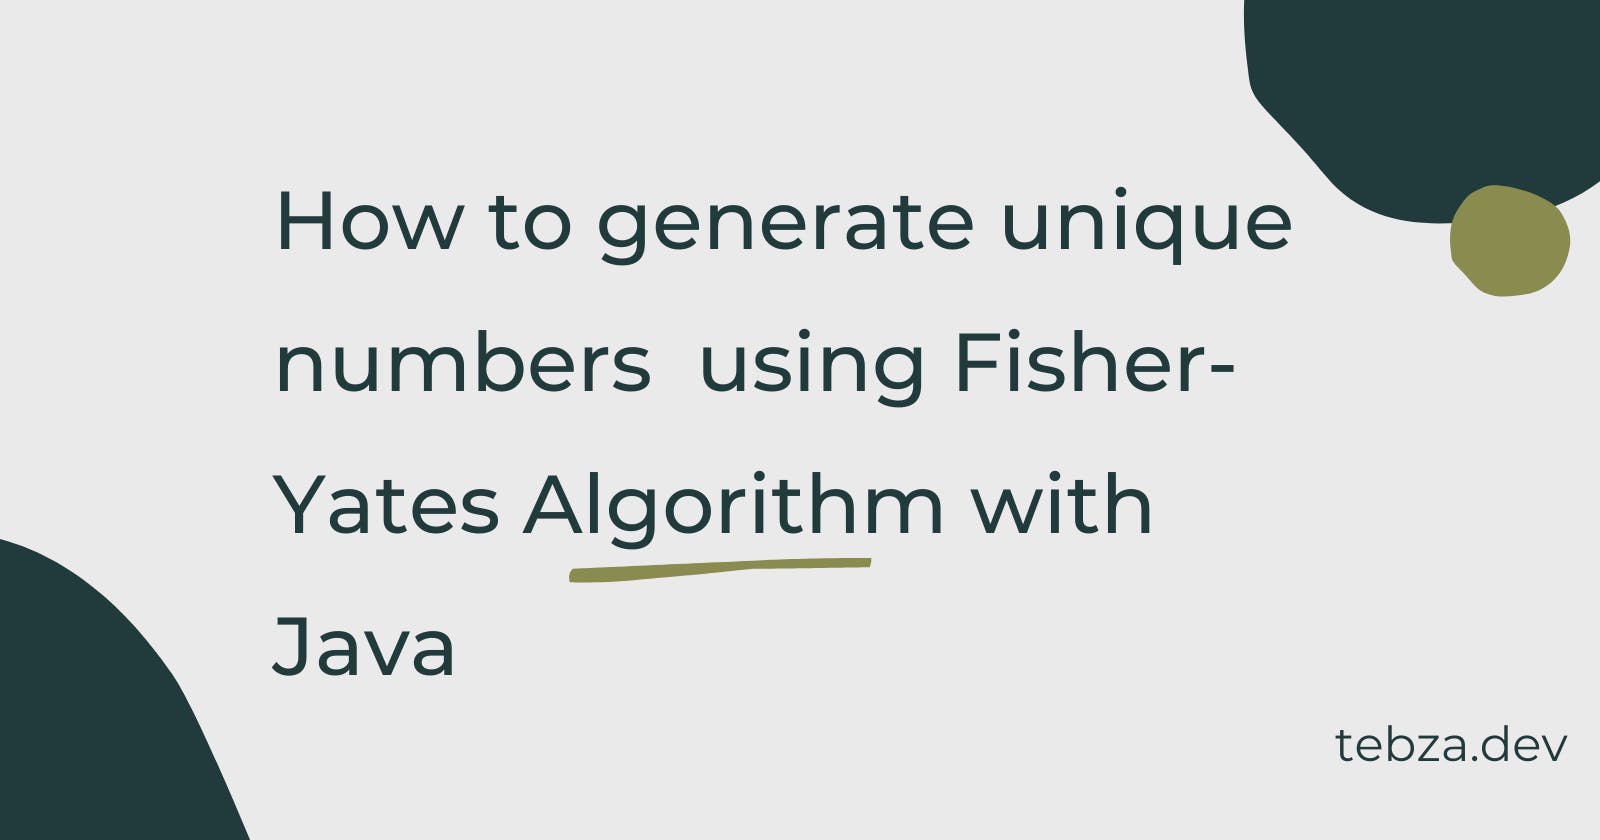 How to generate unique numbers using Fisher-Yates Algorithm with Java